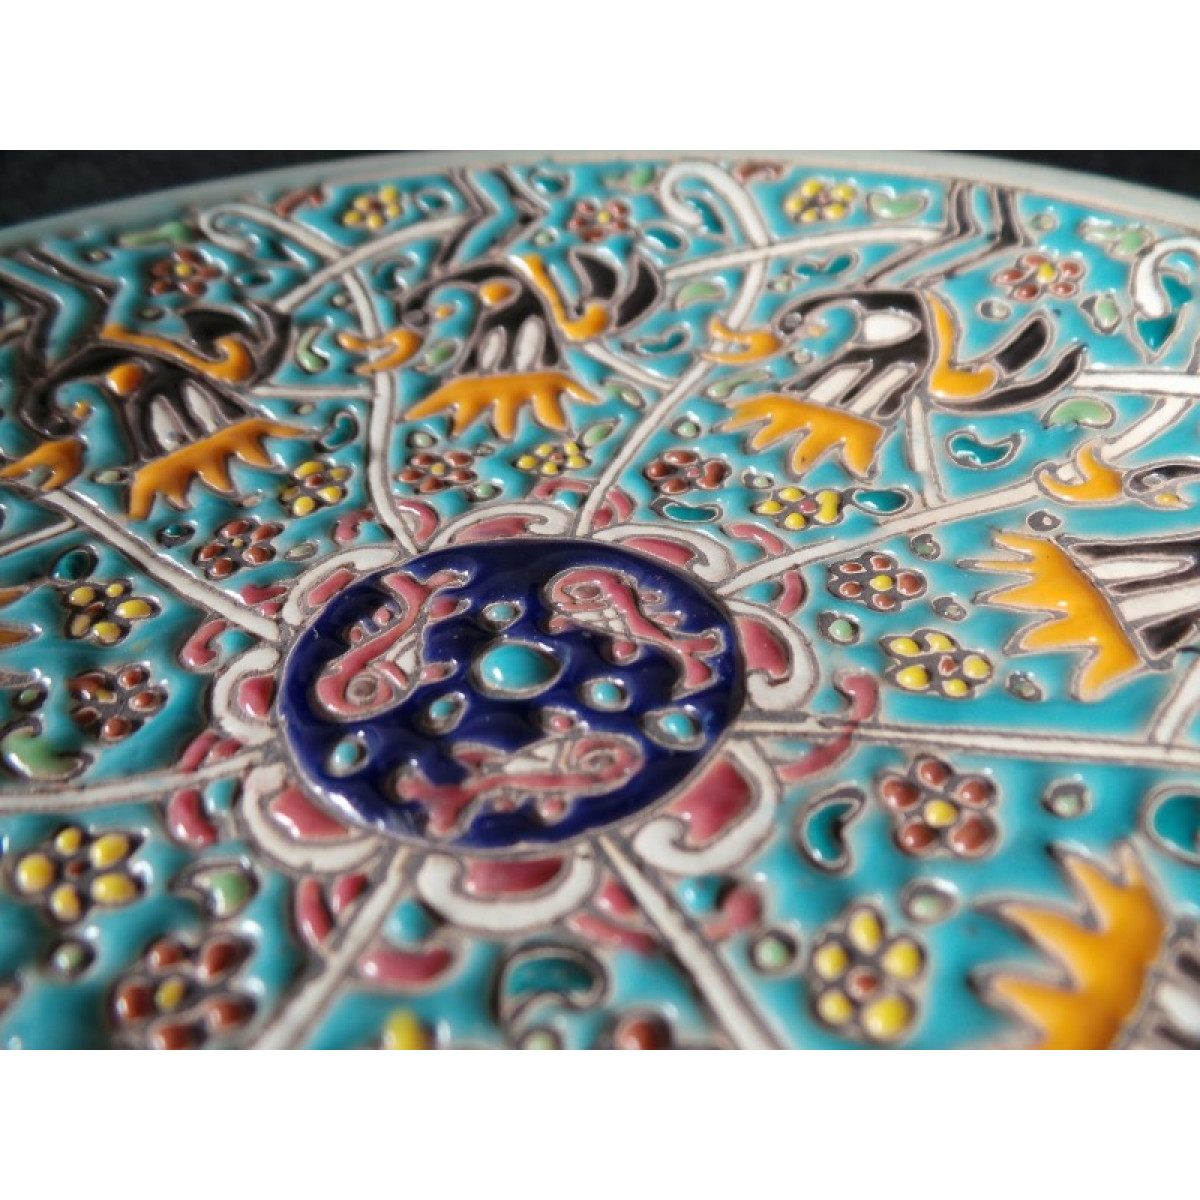 Enameled Pottery Plate & Dish - HE1029-Persian Handicrafts